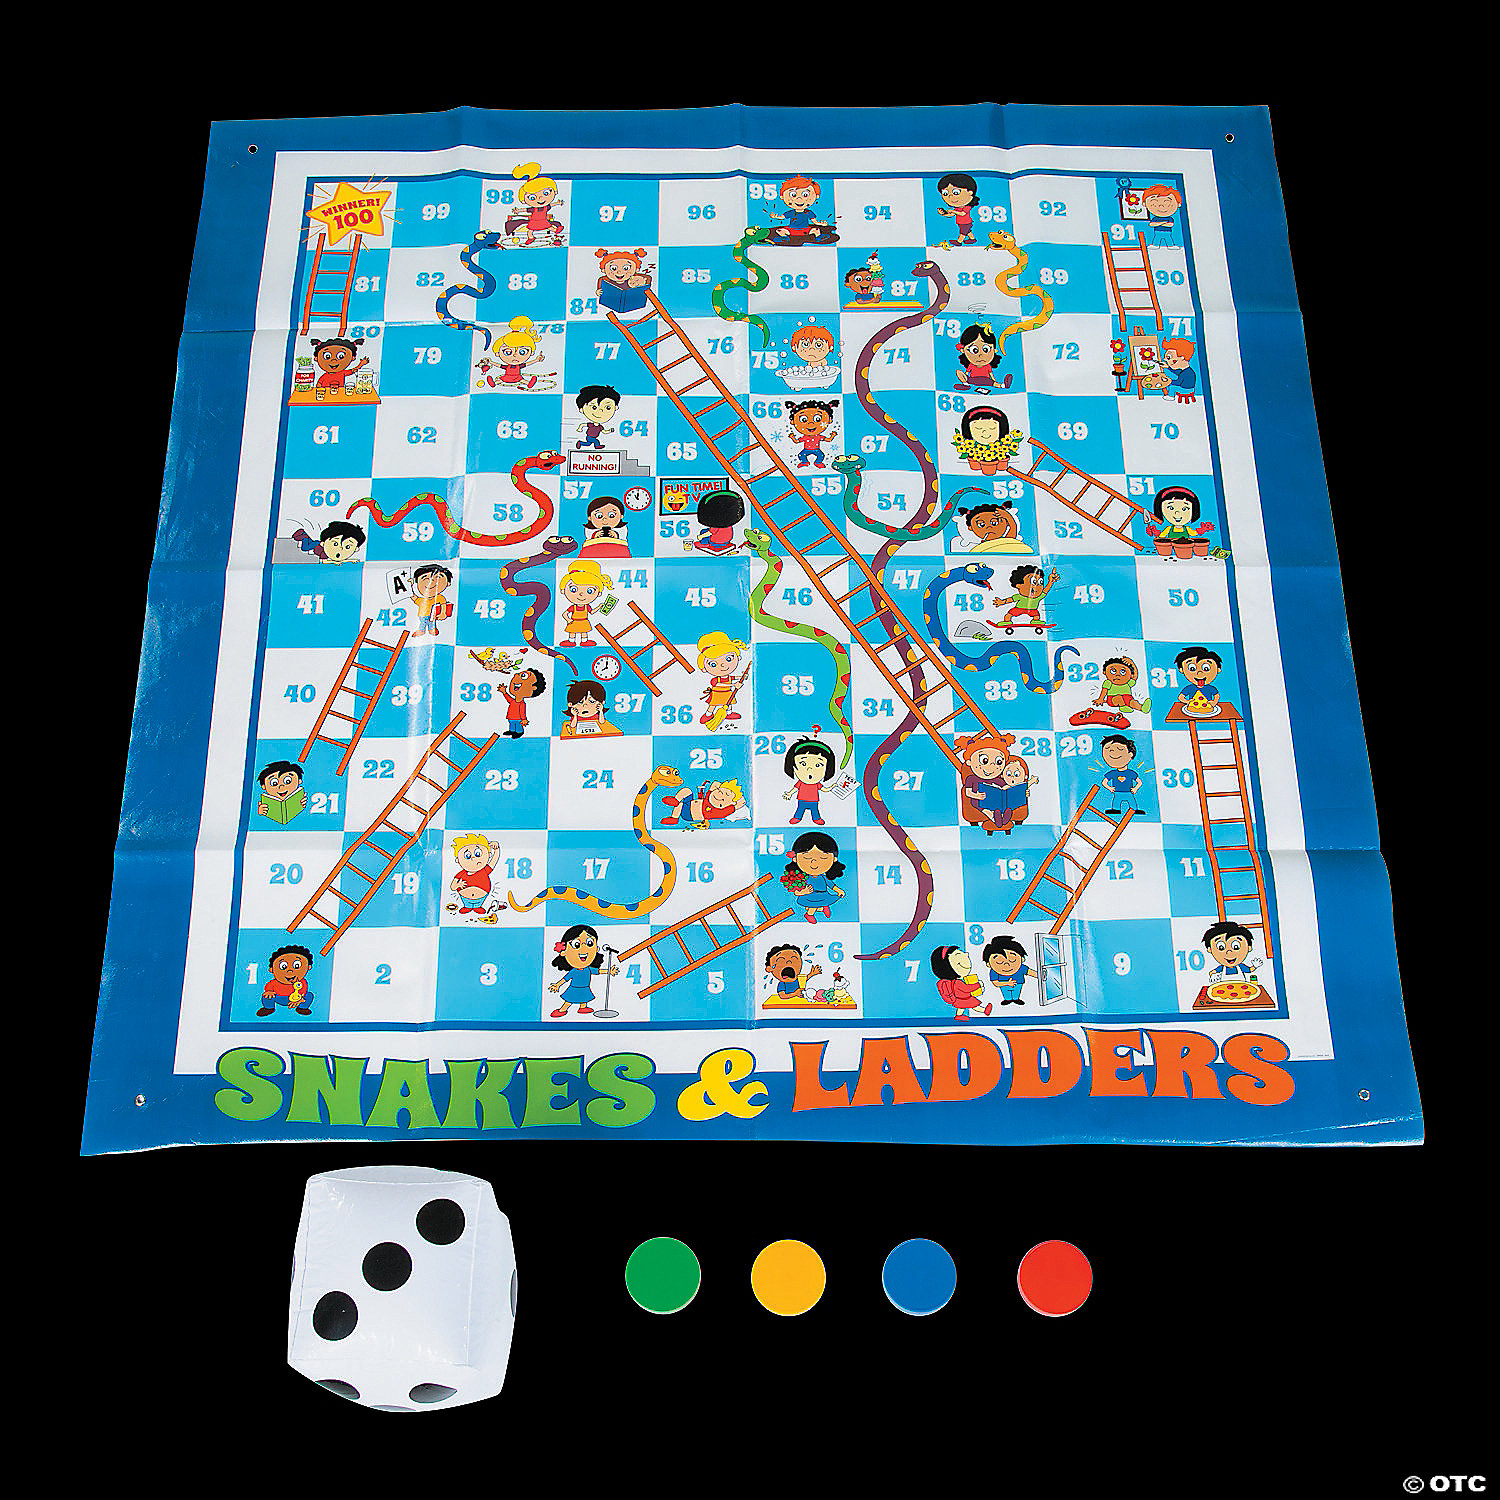 Snakes & Ladders Family Game Great Fun For All The Family LARGE SIZE 